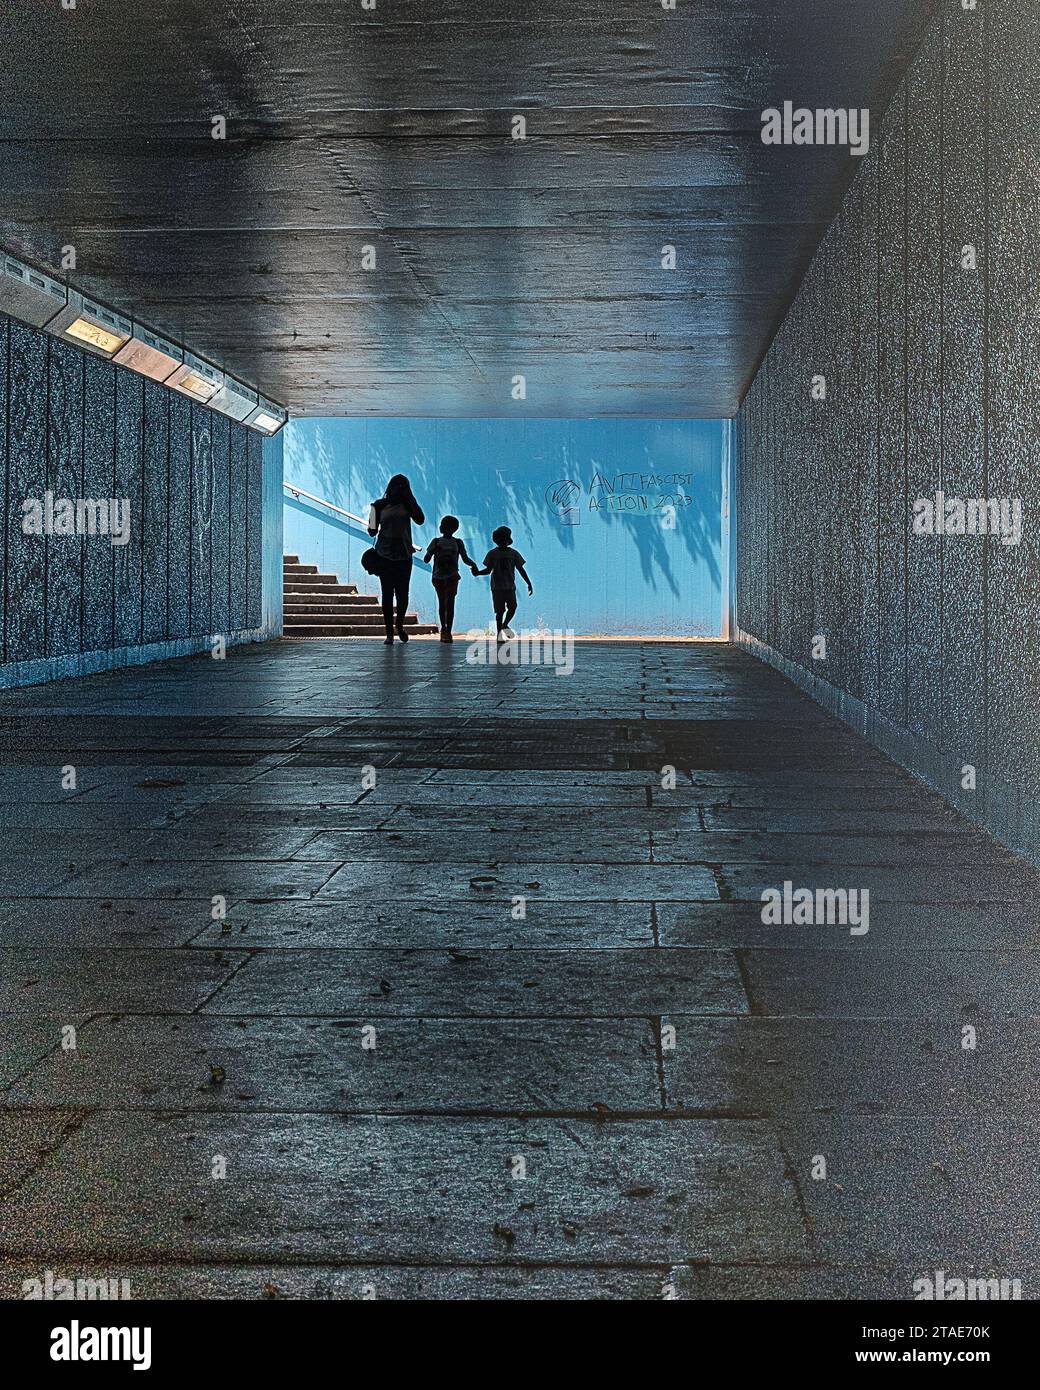 Silhouette of a female & 2 children walking in a dark pedestrian underpass towards steps and daylight. Stock Photo